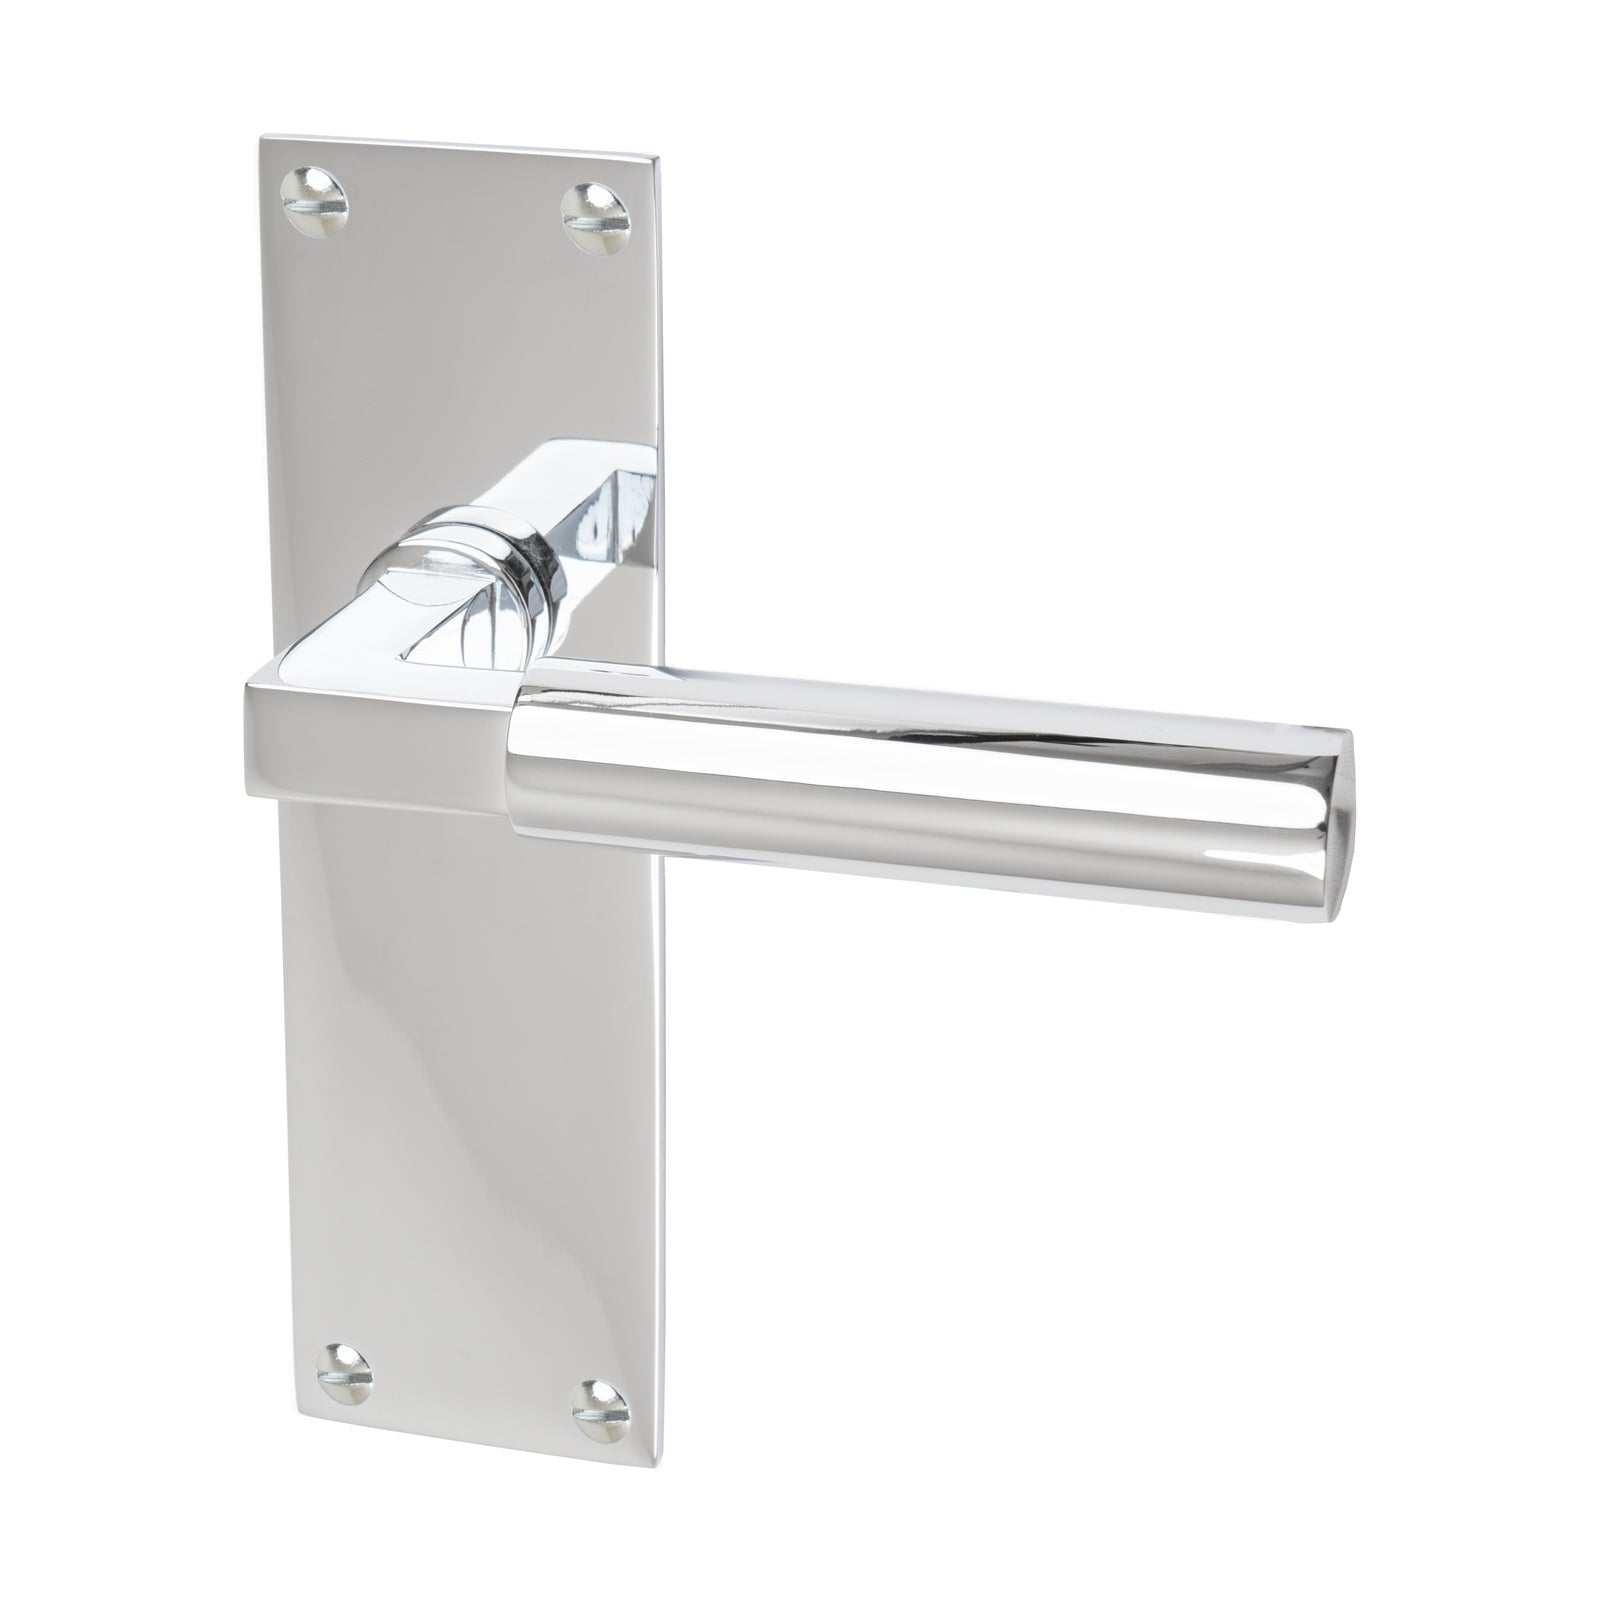 Bauhaus Door Handles On Plate Latch Handle in Polished Chrome SHOW